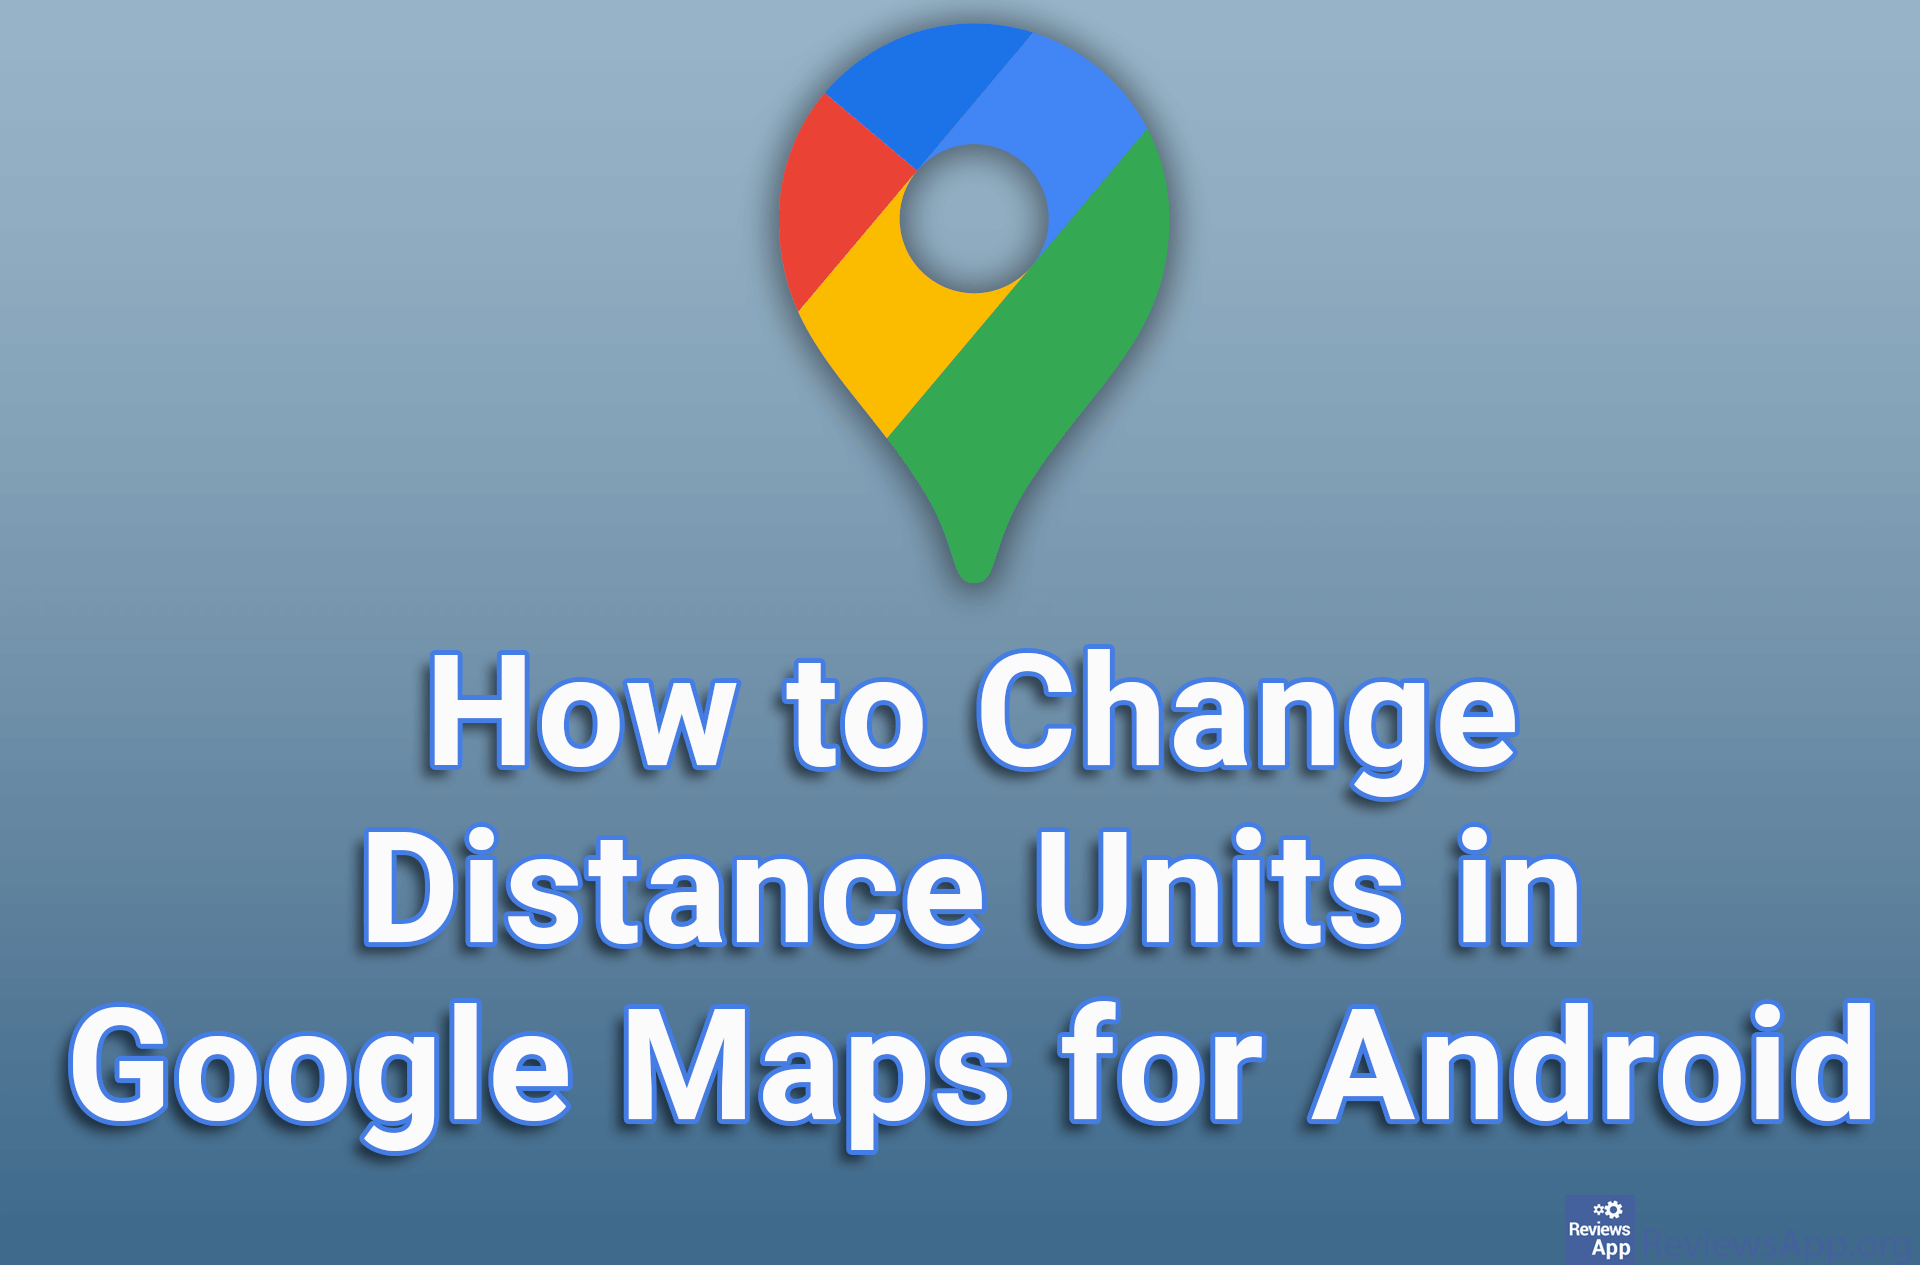 How to Change Distance Units in Google Maps for Android